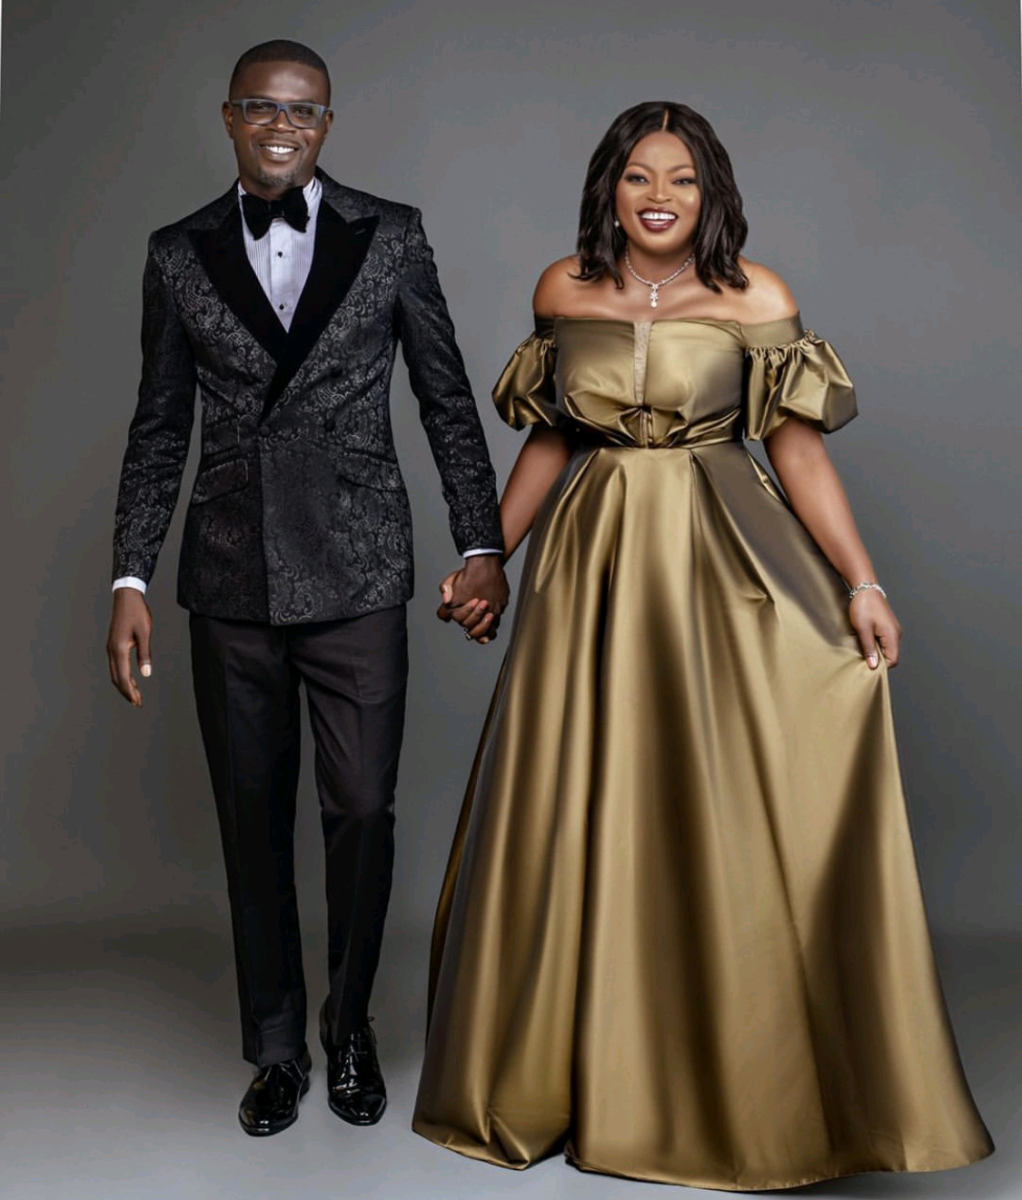 “Distance us from shame and failure” JJC Skillz writes days after sparking reconciliation rumours with Funke Akindele